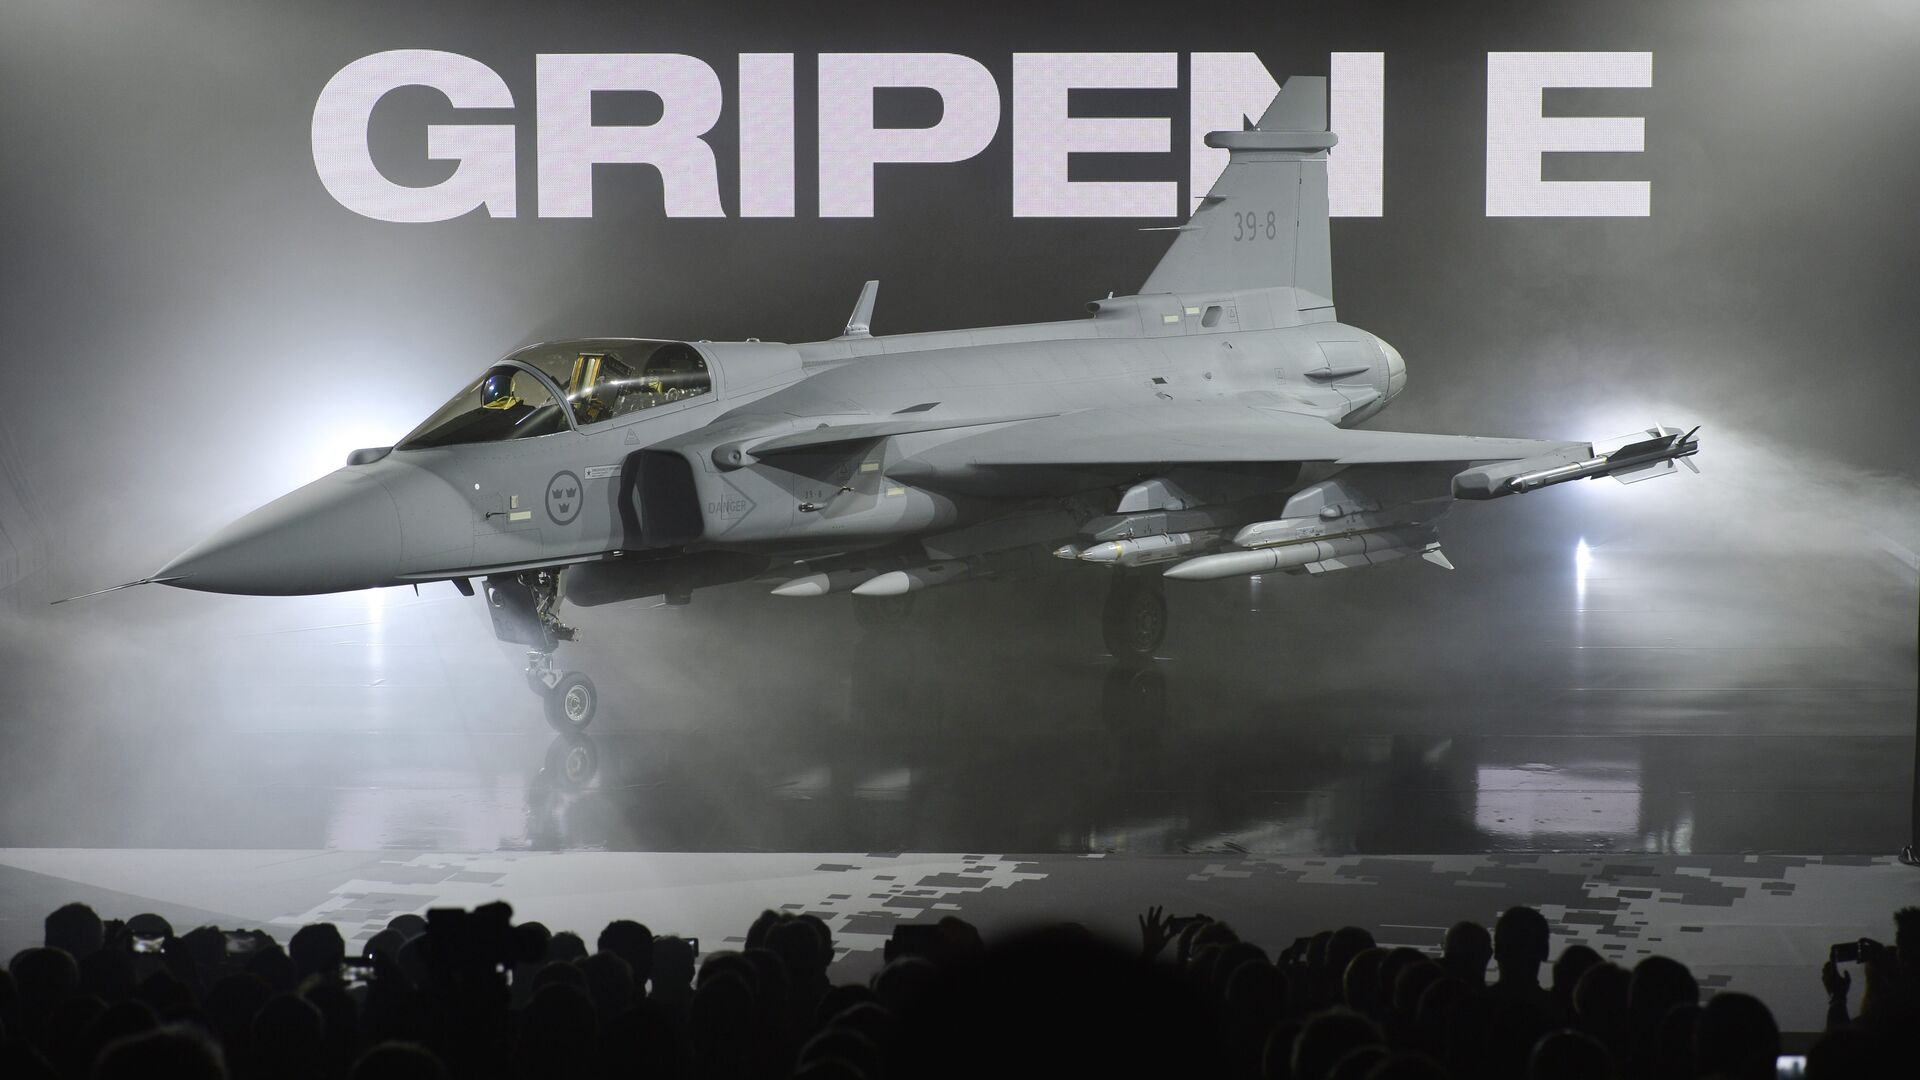 The new E version of the Swedish JAS 39 Gripen multirole fighter is presented at the SAAB in Linkoping, on May 18, 2016. - اسپوتنیک ایران  , 1920, 12.09.2023